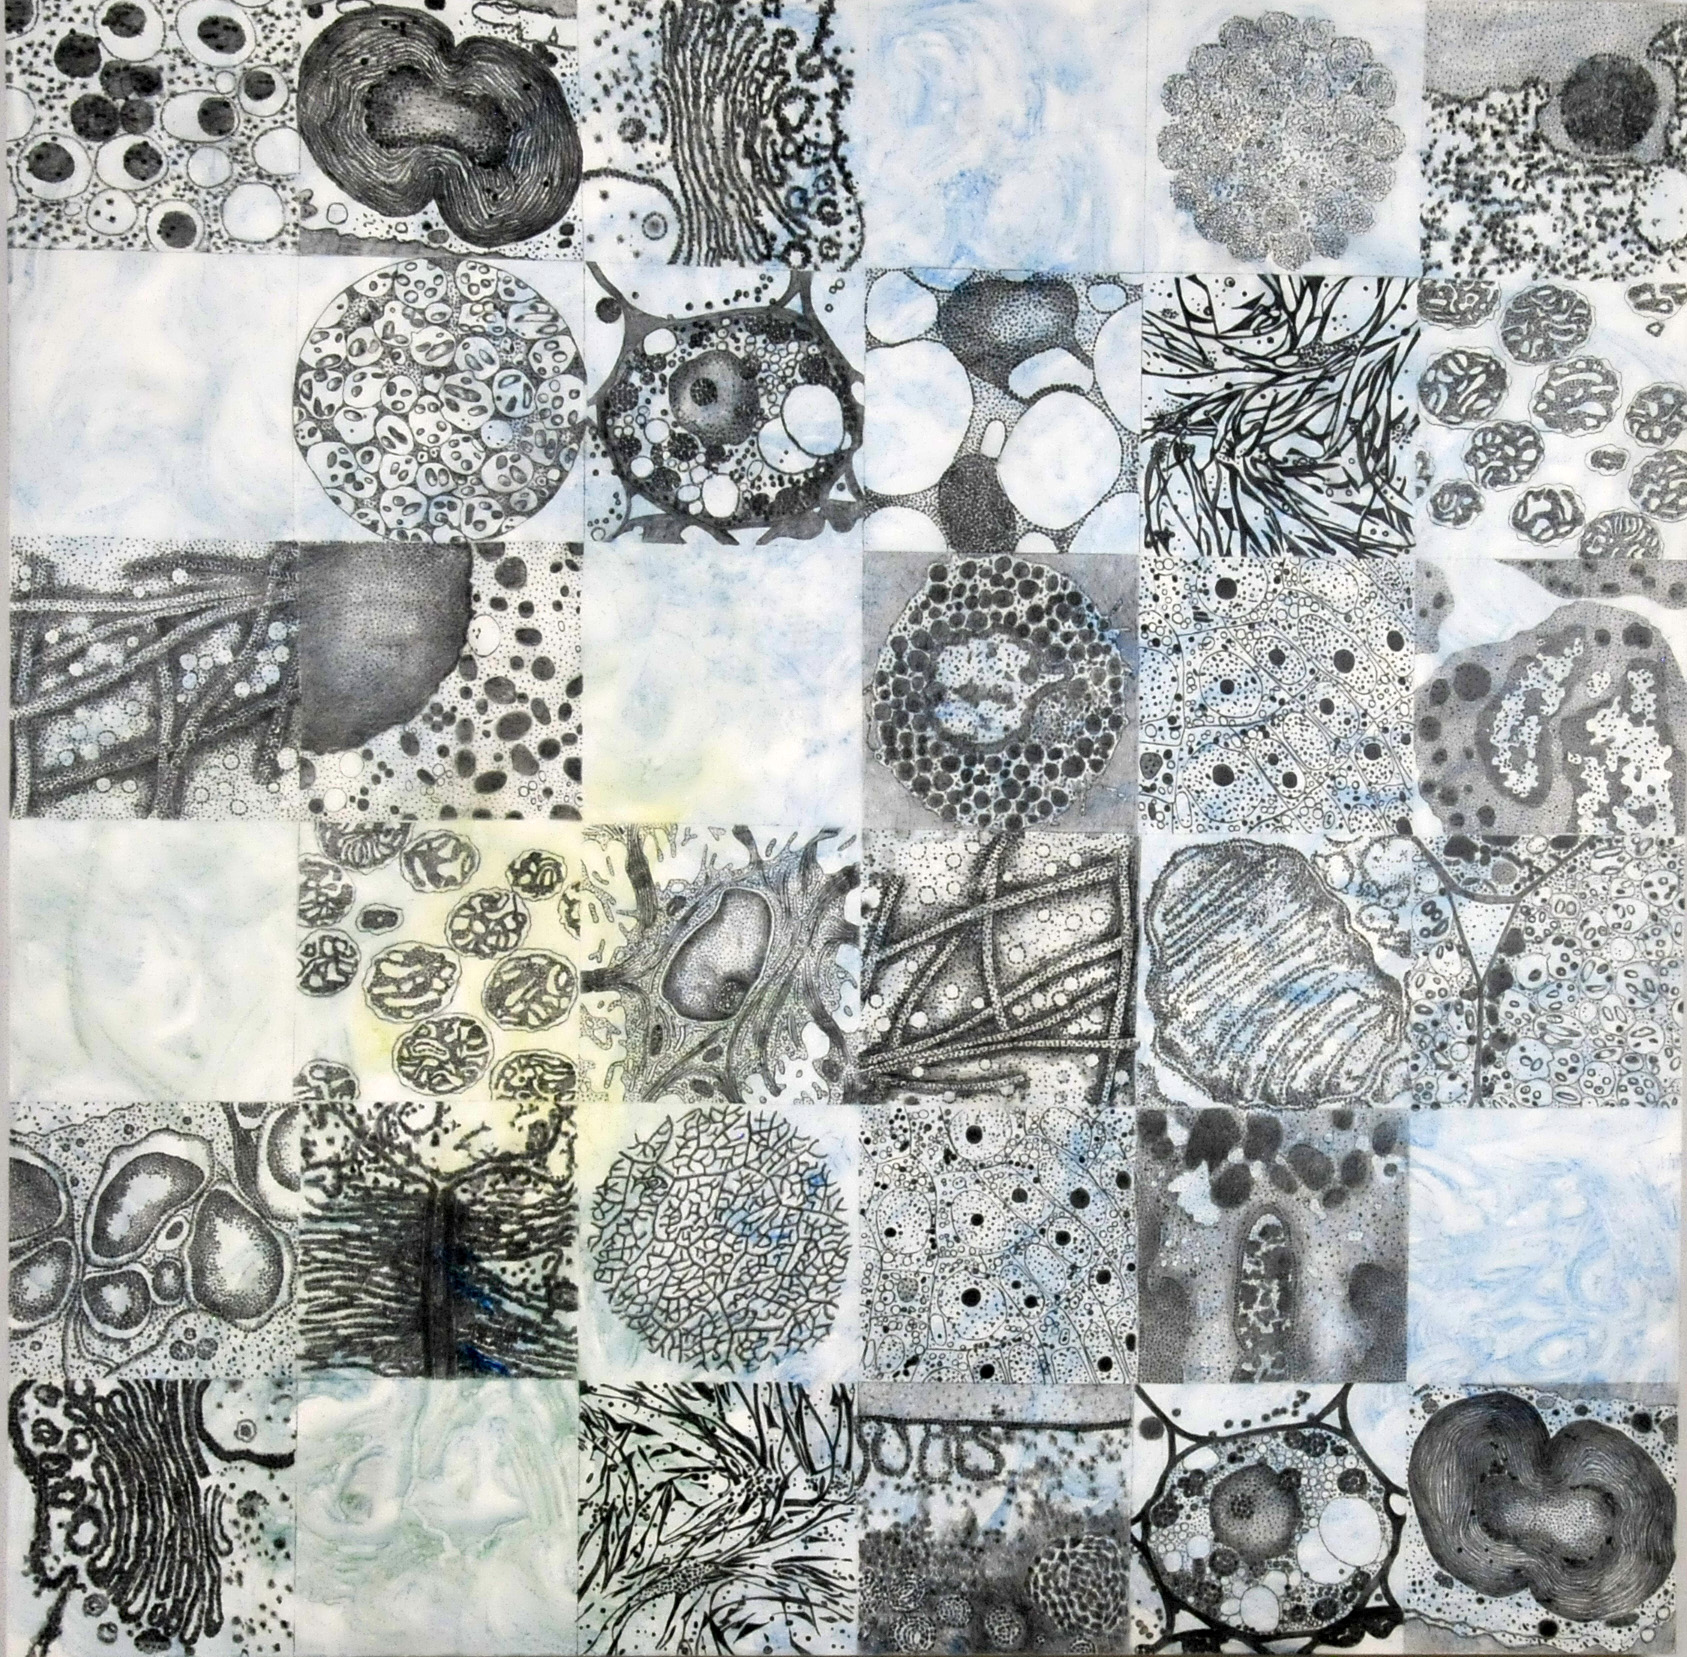   Plant Cell Patterns #2, acrylic and graphite on panel, 30x30   